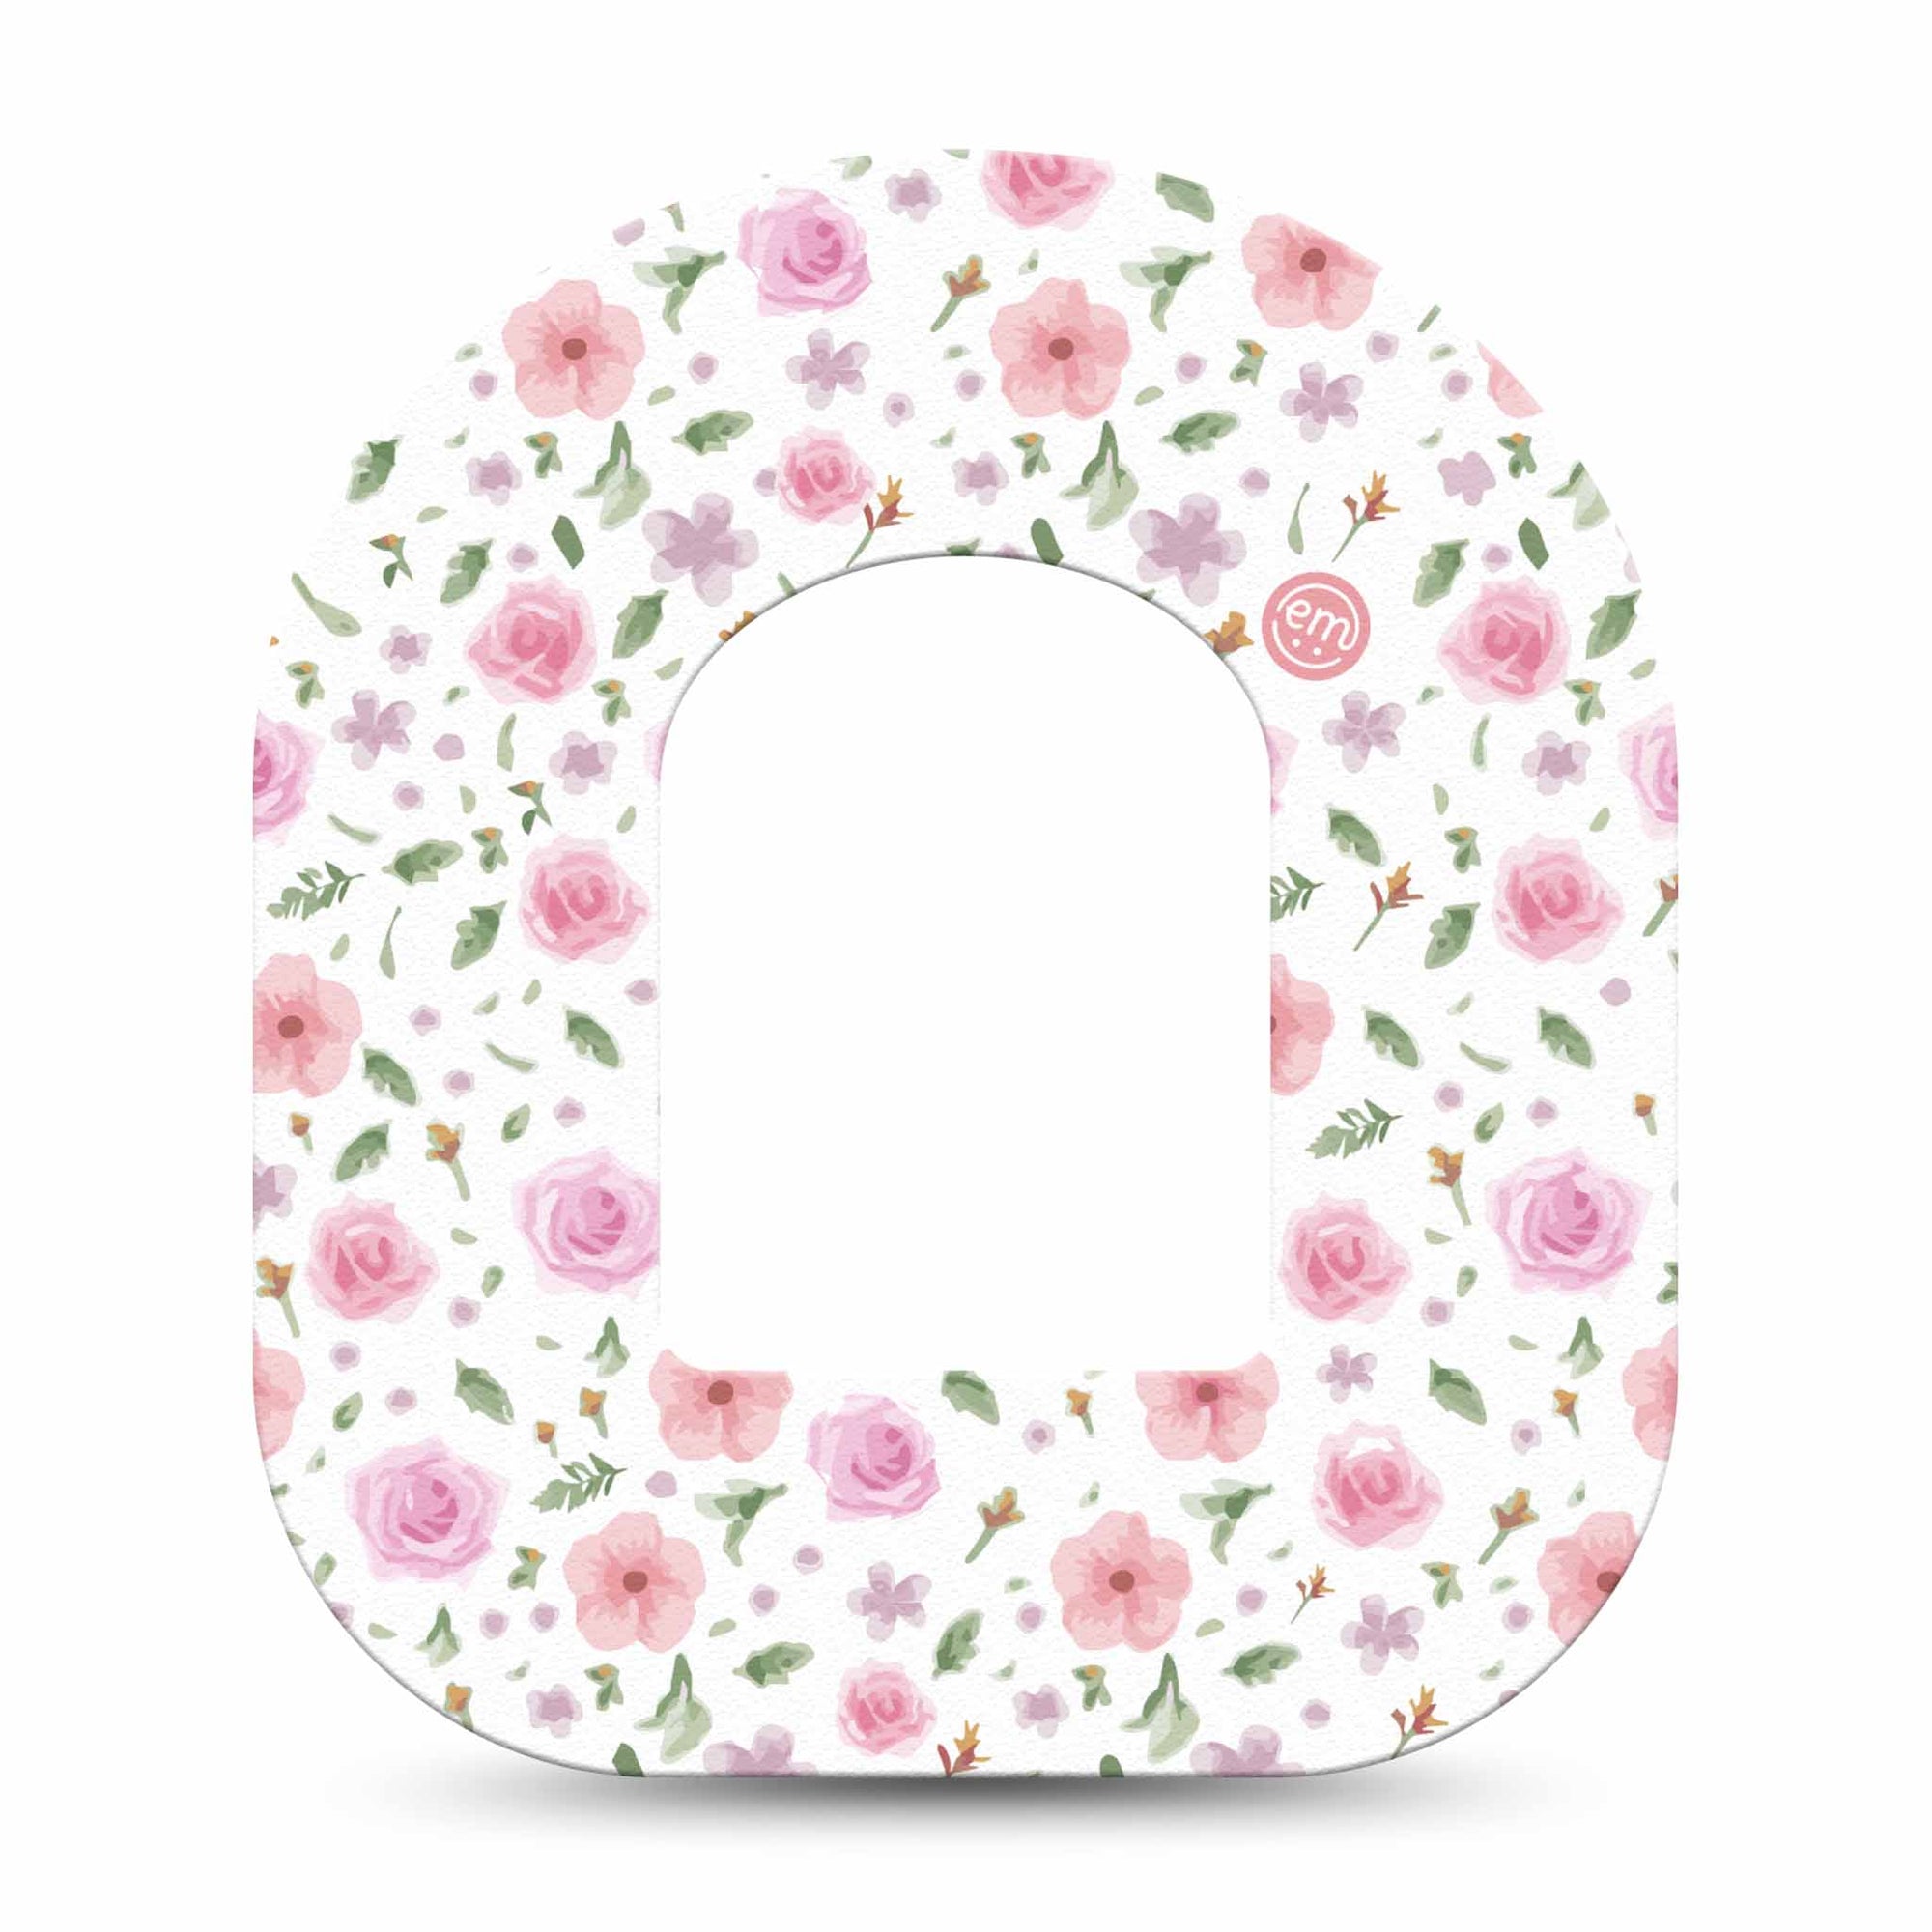 ExpressionMed Pastel Flowers Pod Tape